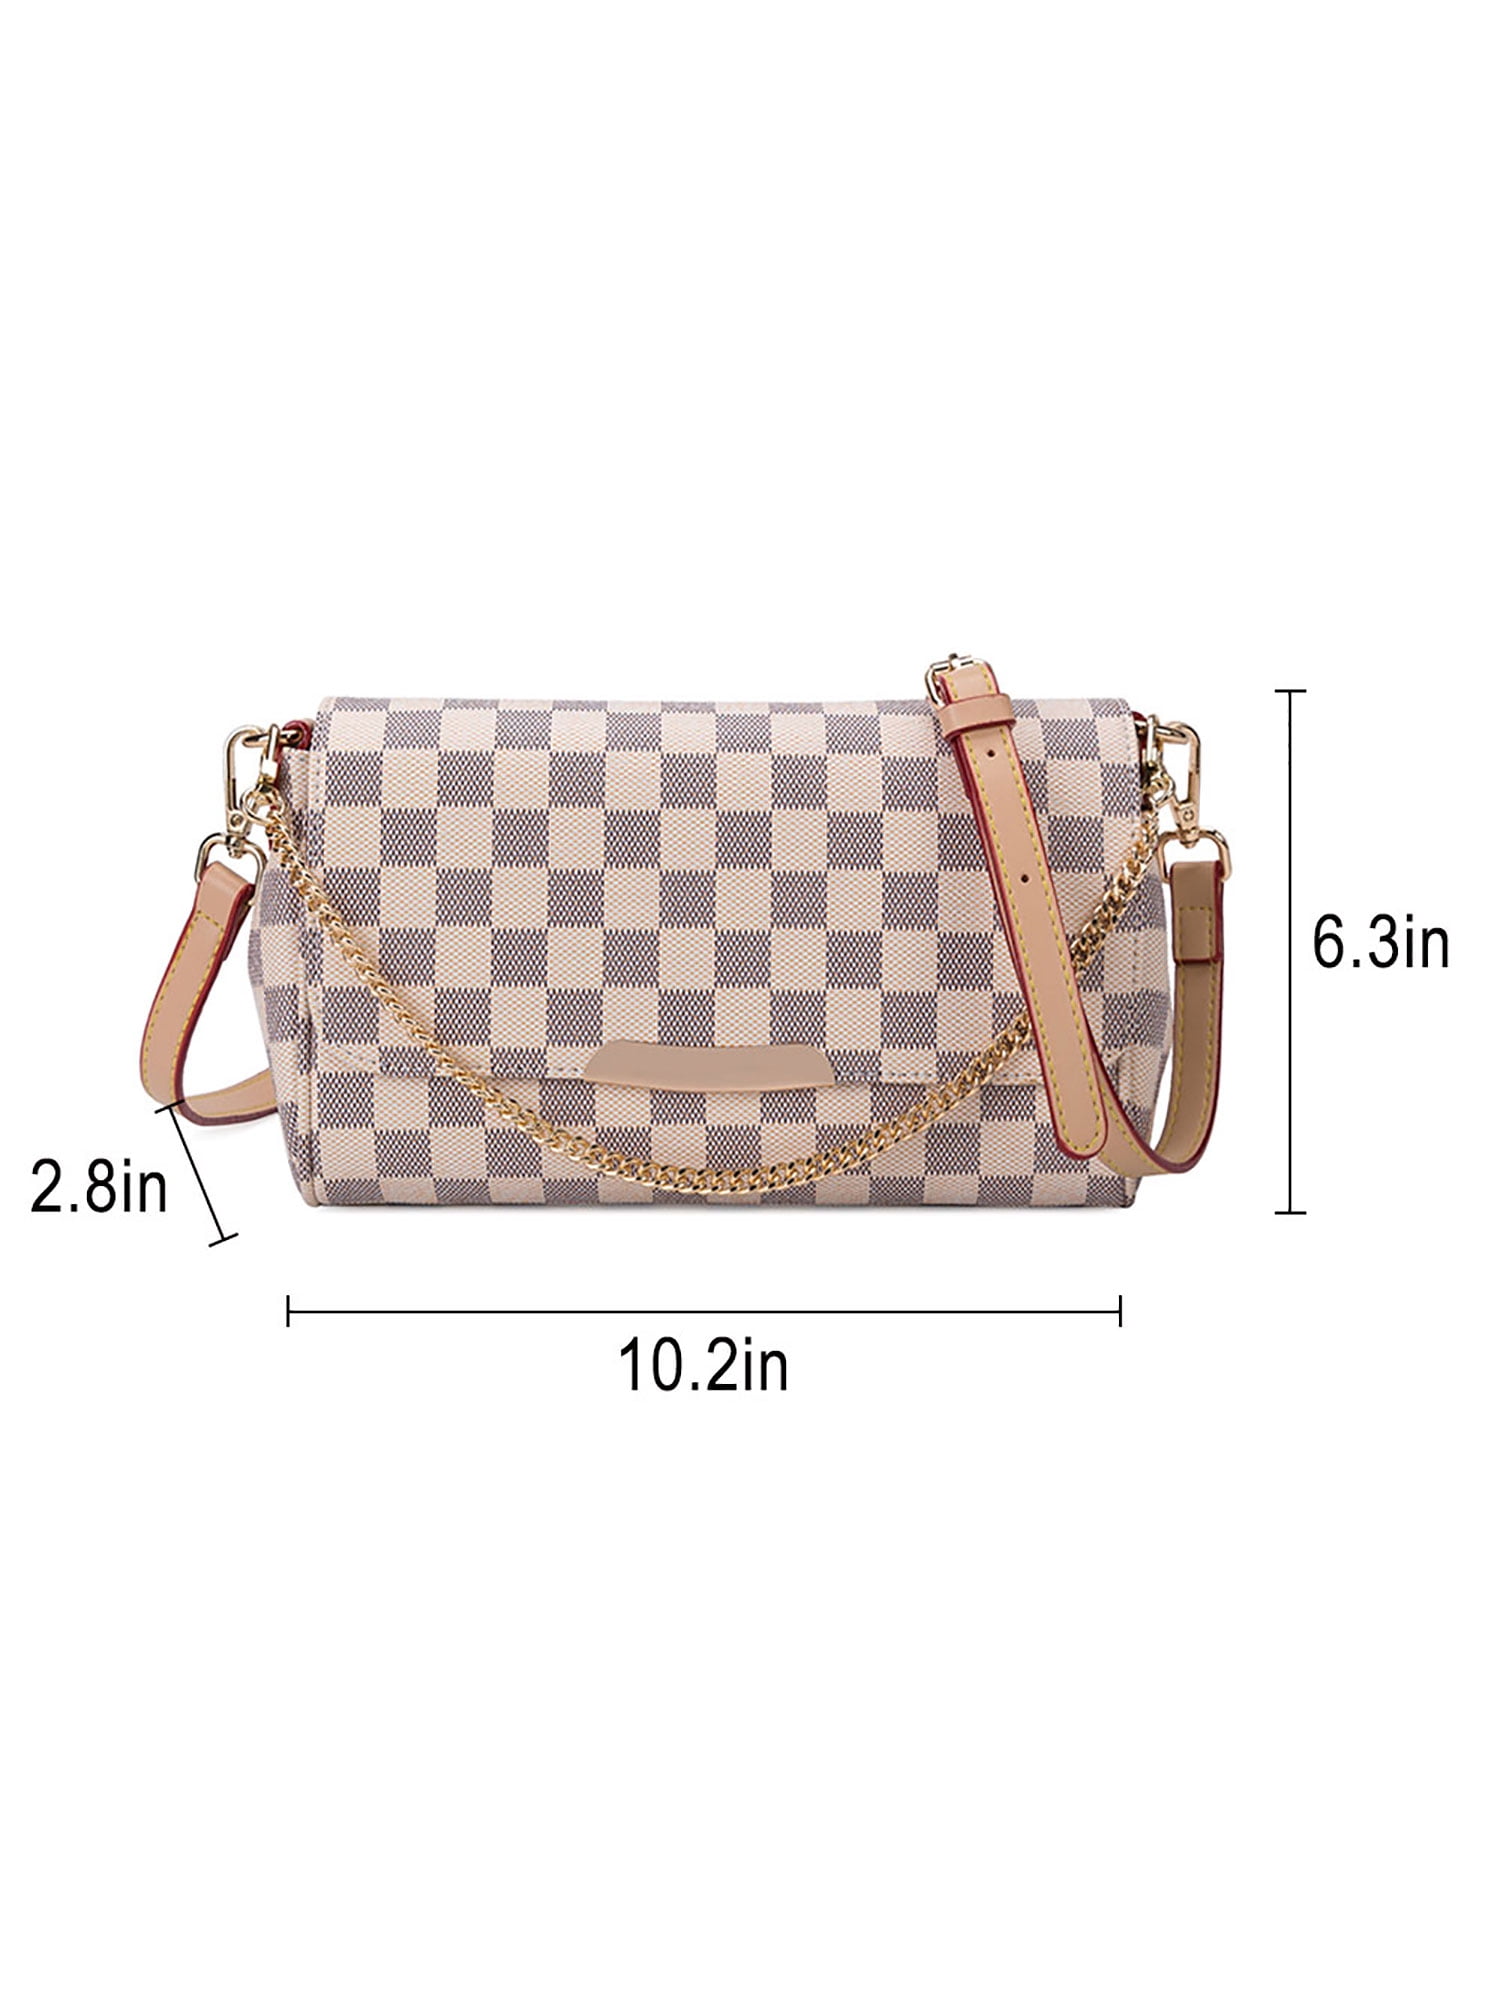 Sexy Dance Women Checkered Backpack Fashion Backpack Leather Satchel  Handbag Purse School Daypack for Xmas Christmas Birthday Gifts 